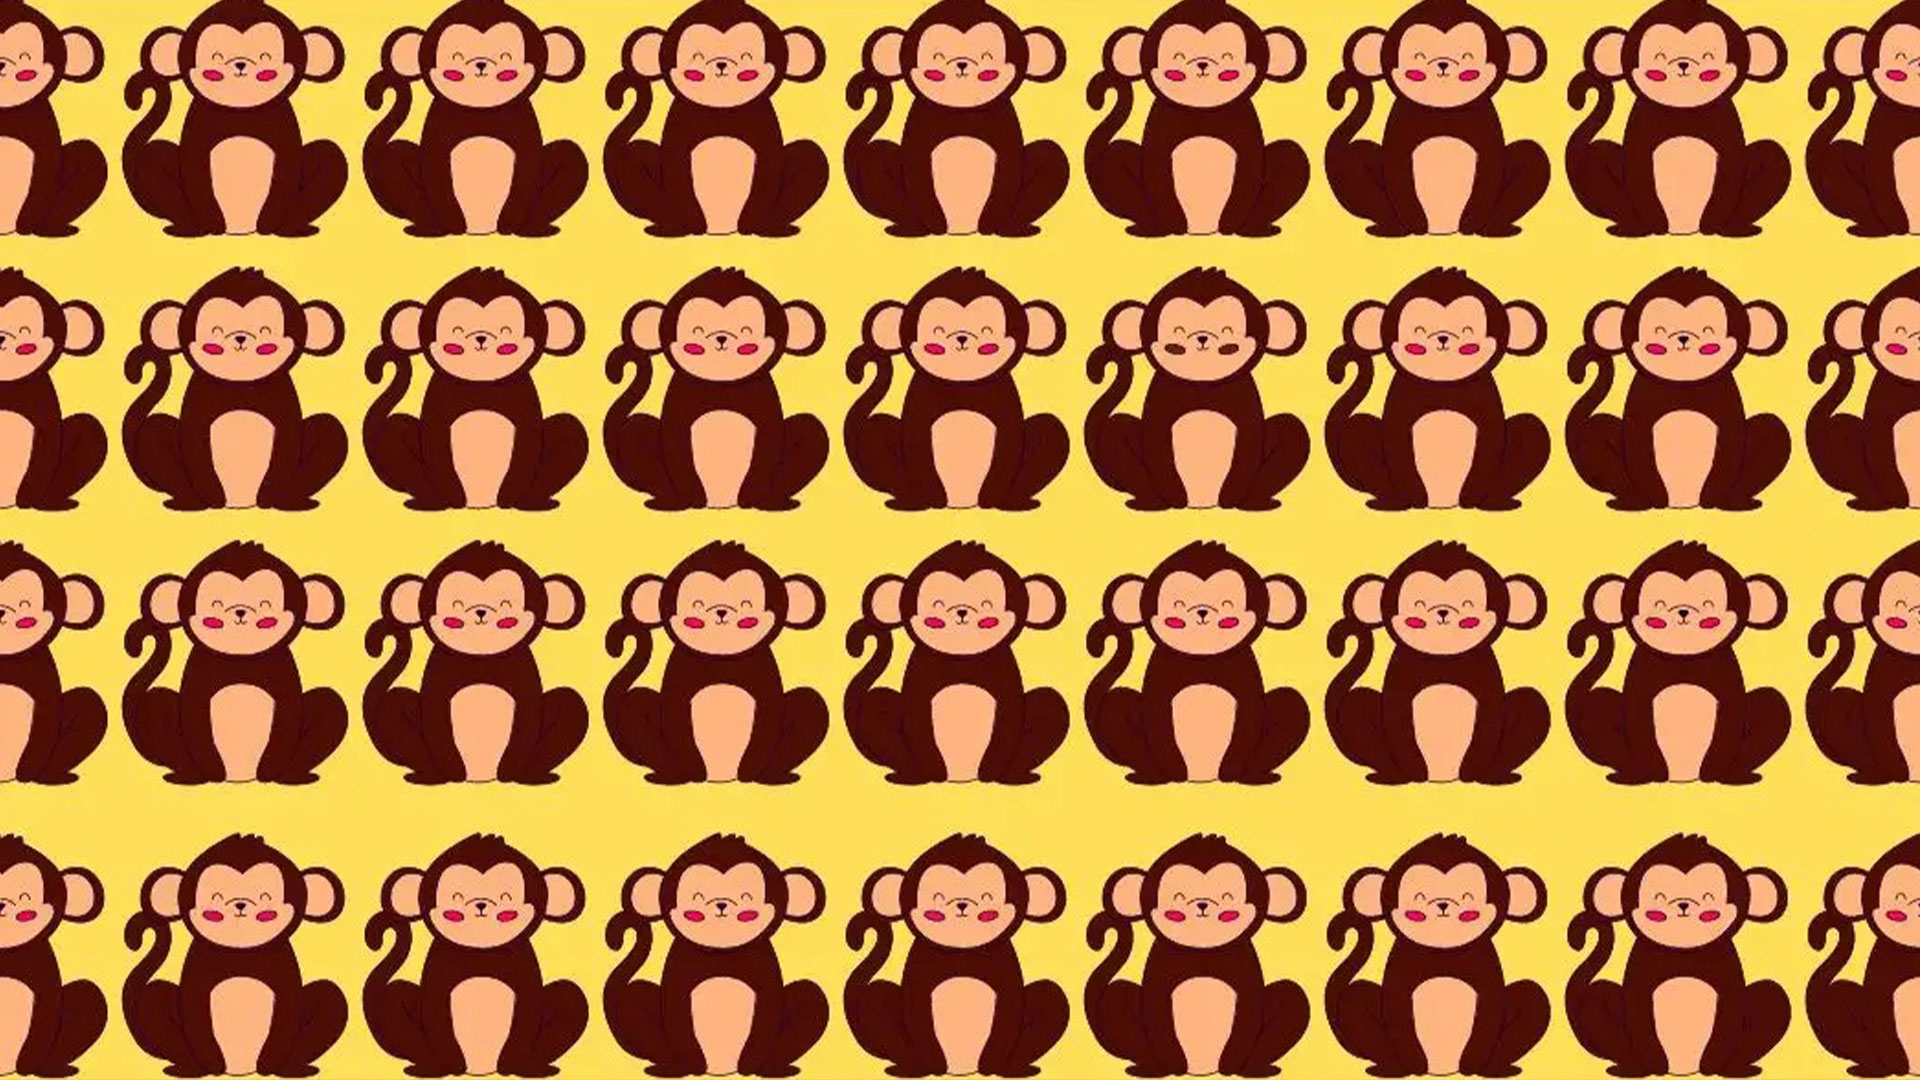 Boost your visual skills: Spot the odd monkey in 10 seconds with 20/20 precision!